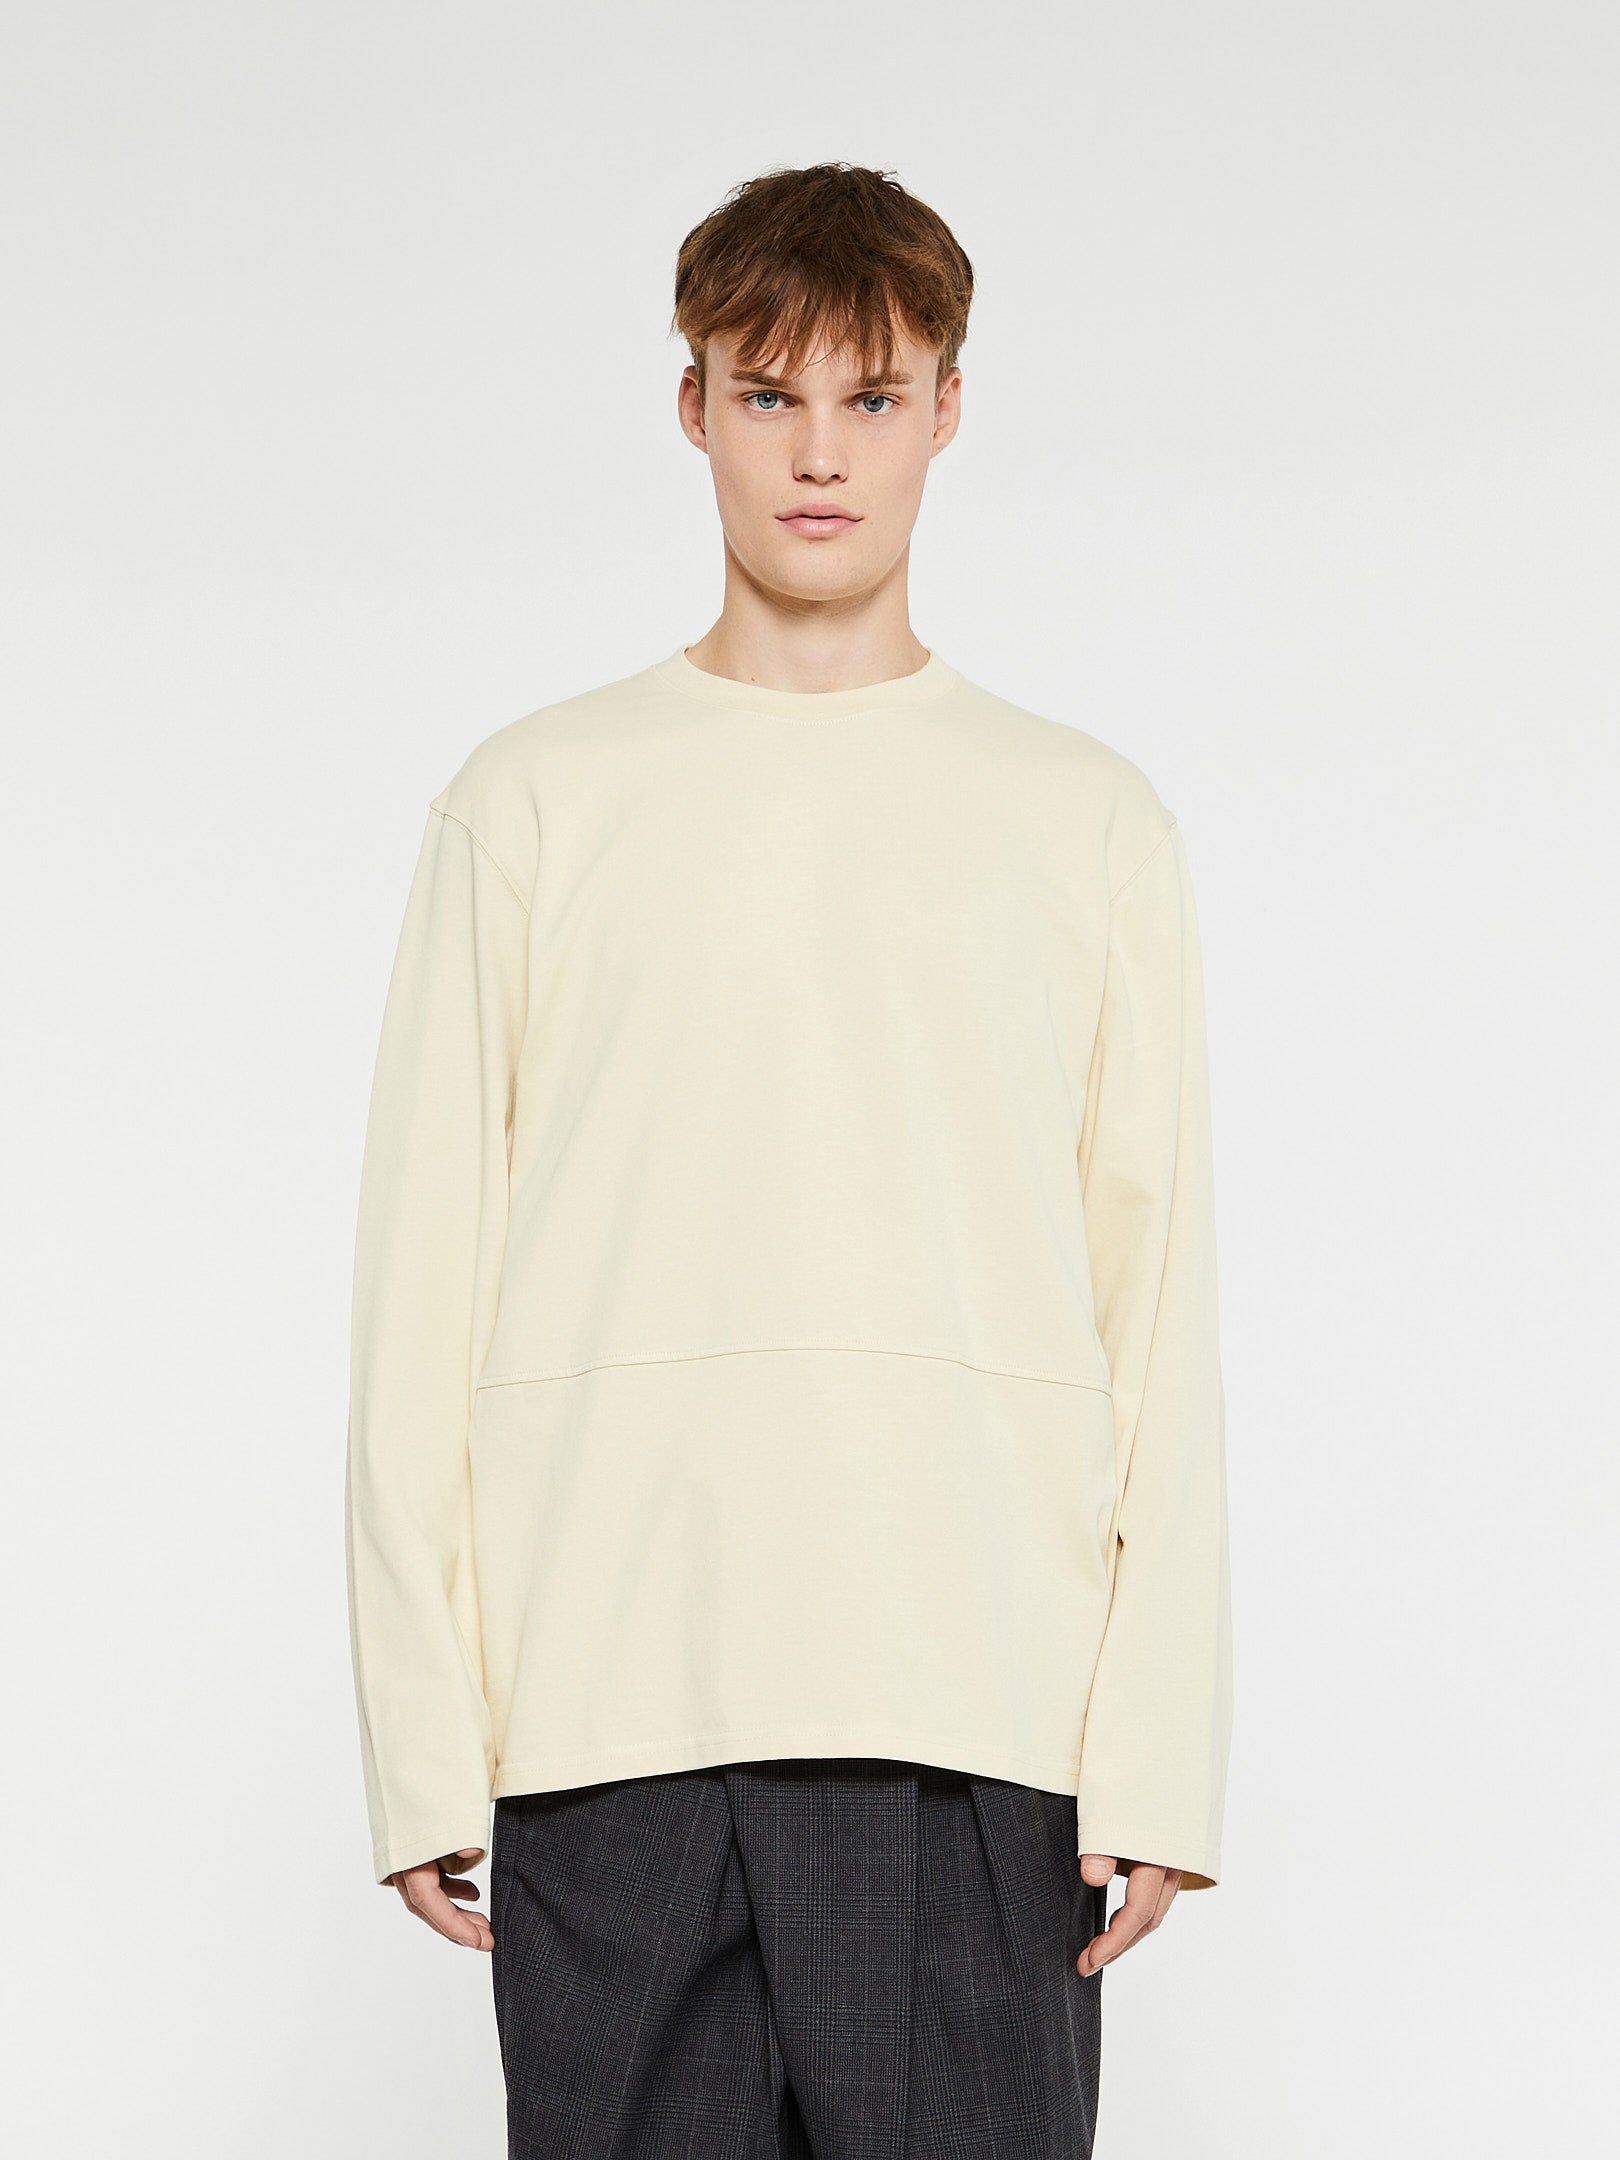 Palmes - Cry Tennis Top in Off White